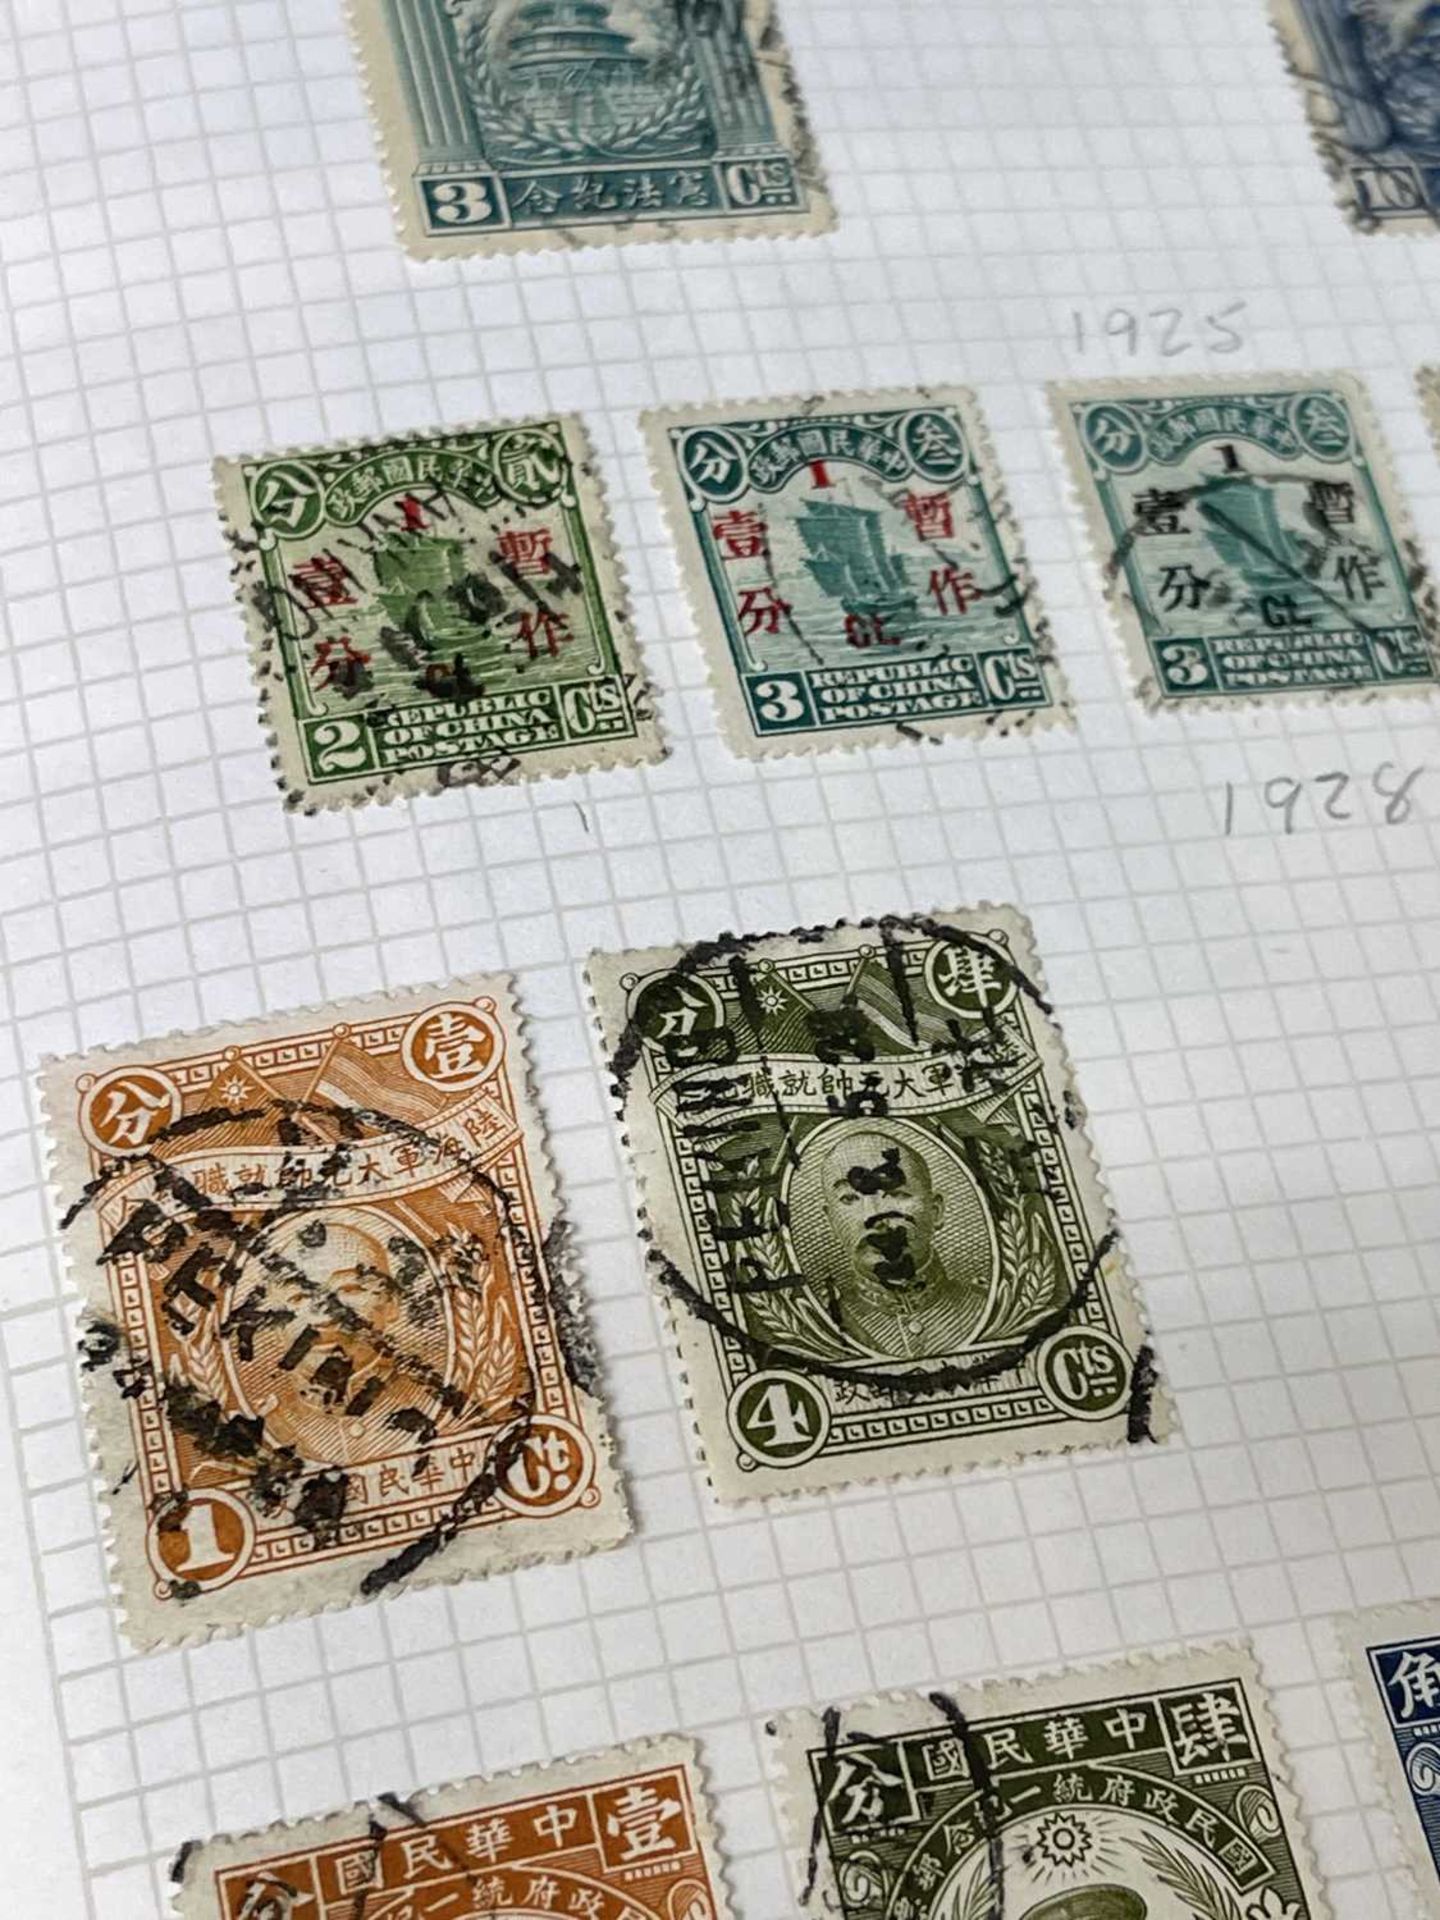 China / Taiwan / Hong Kong Stamp Collection plus rare 1920-1922 International Famine Relief 1 Cent - Image 2 of 7